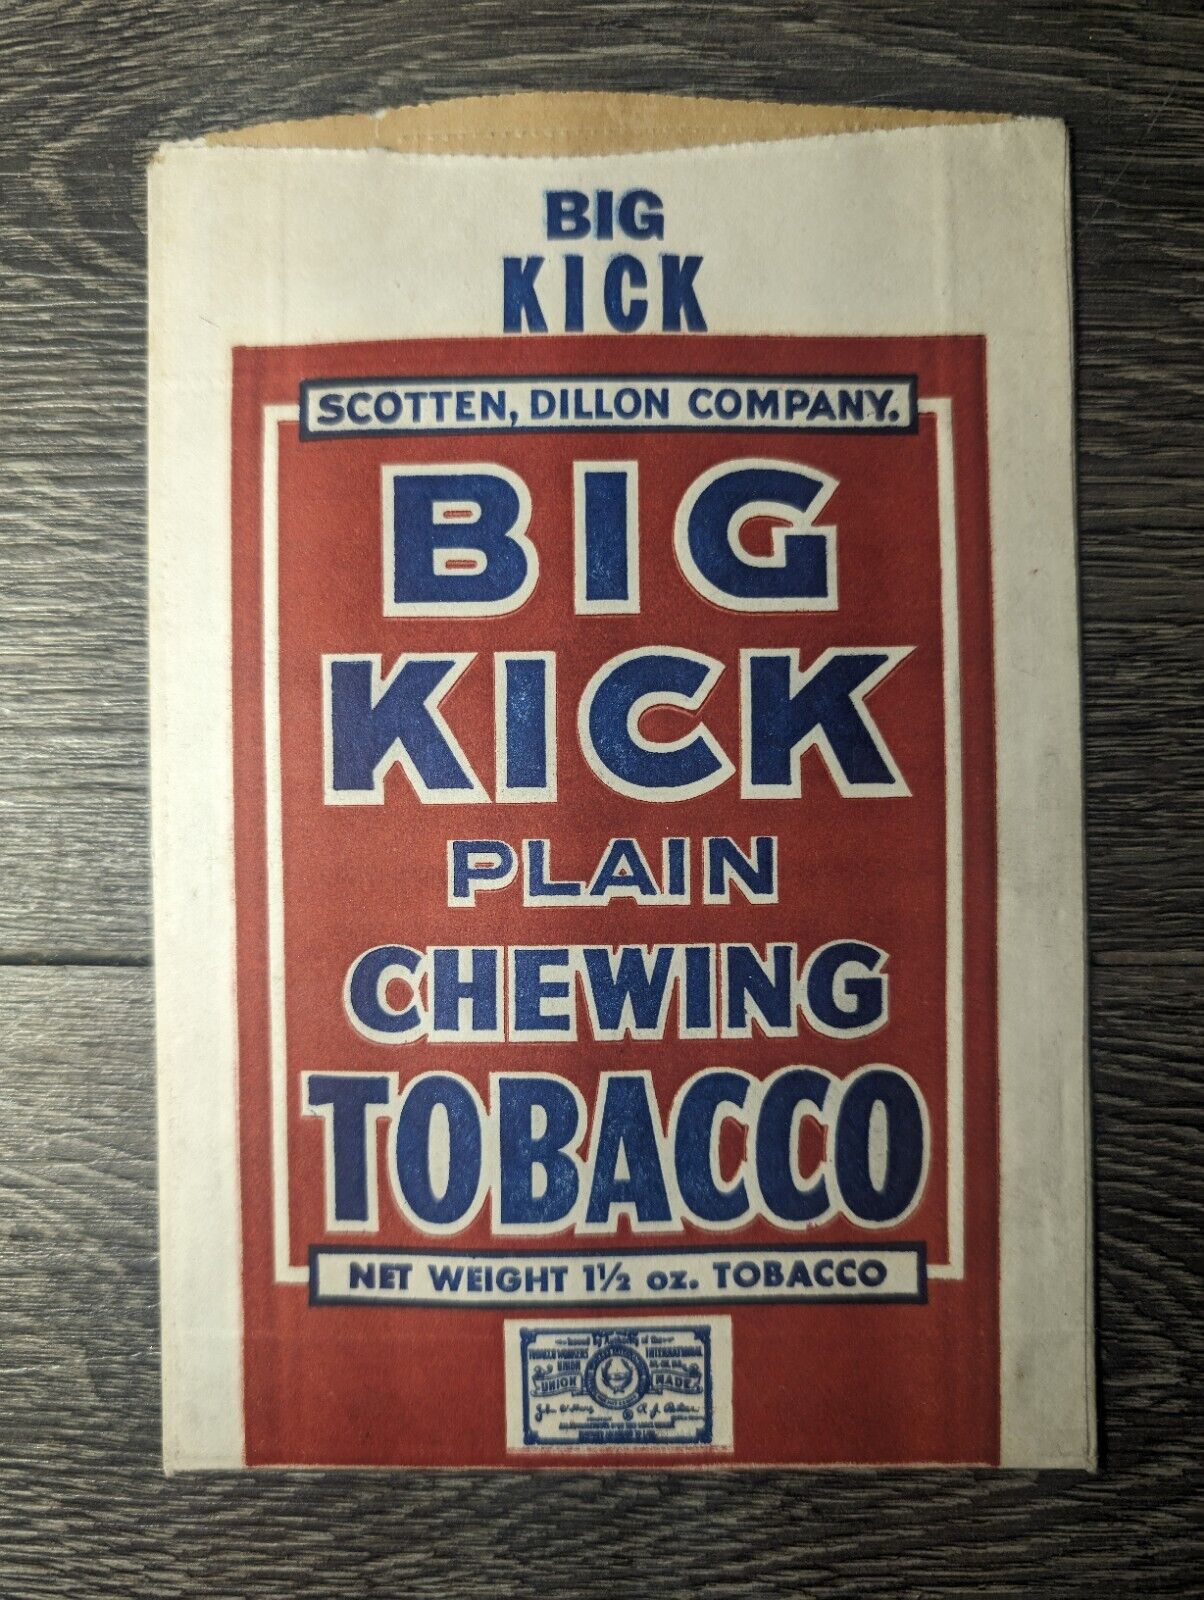 BIG KICK PLAIN CHEWING TOBACCO POUCH ADVERTISING BAG SCOTTEN,DILLON CO. 2-SIDED